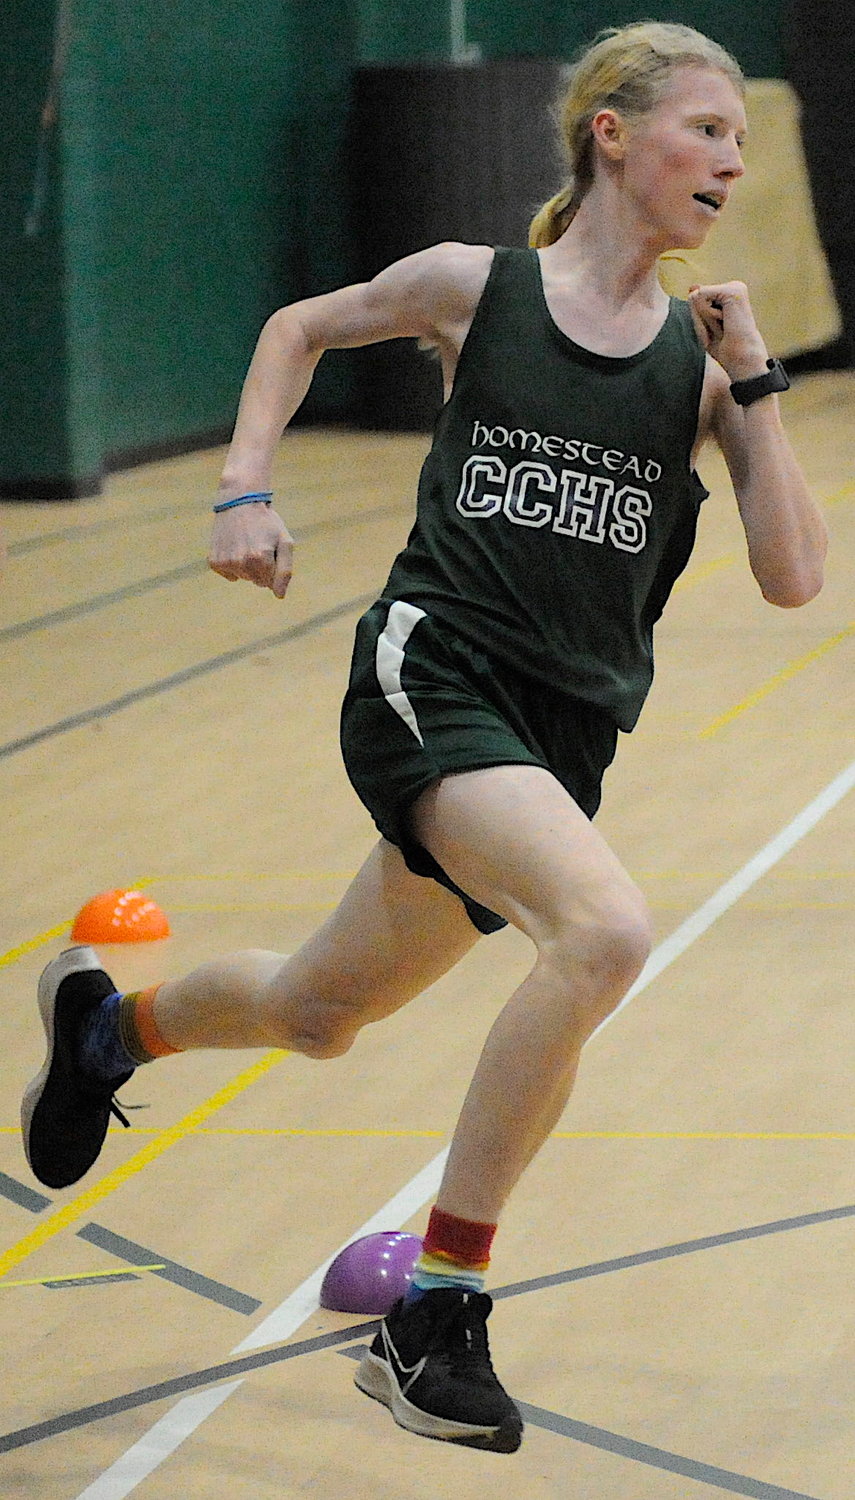 Bruce Shannon, a sophomore, is in for the long haul. He runs the 1,600-meter and 3,200-meter races. Last year he was a “team of one,” and competed at the state qualifiers. This season, he is just a point shy of returning to the qualifiers.